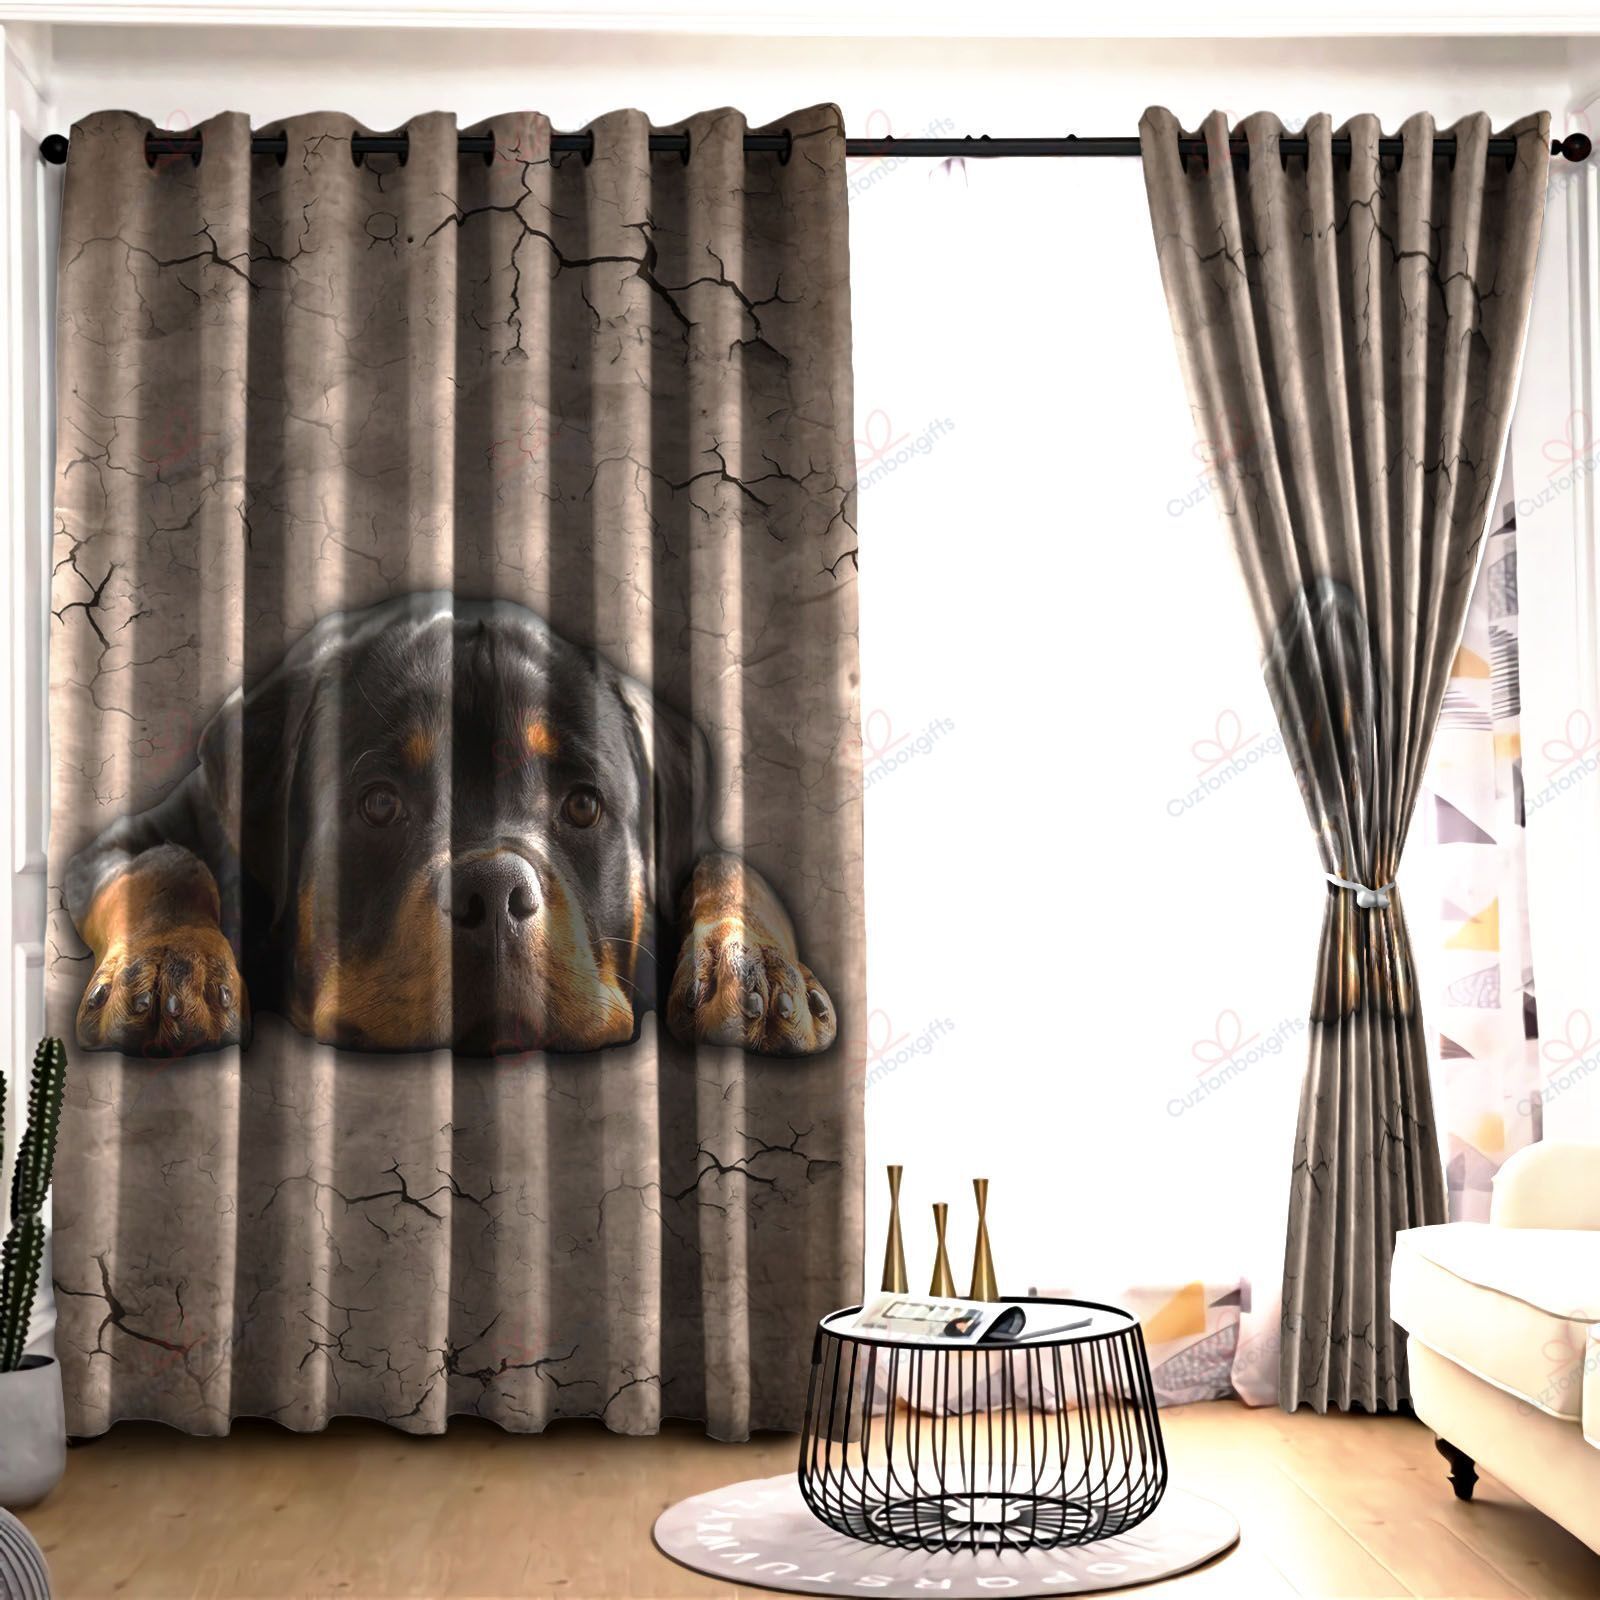 Rottweiler Lover Printed Window Curtains Home Decor